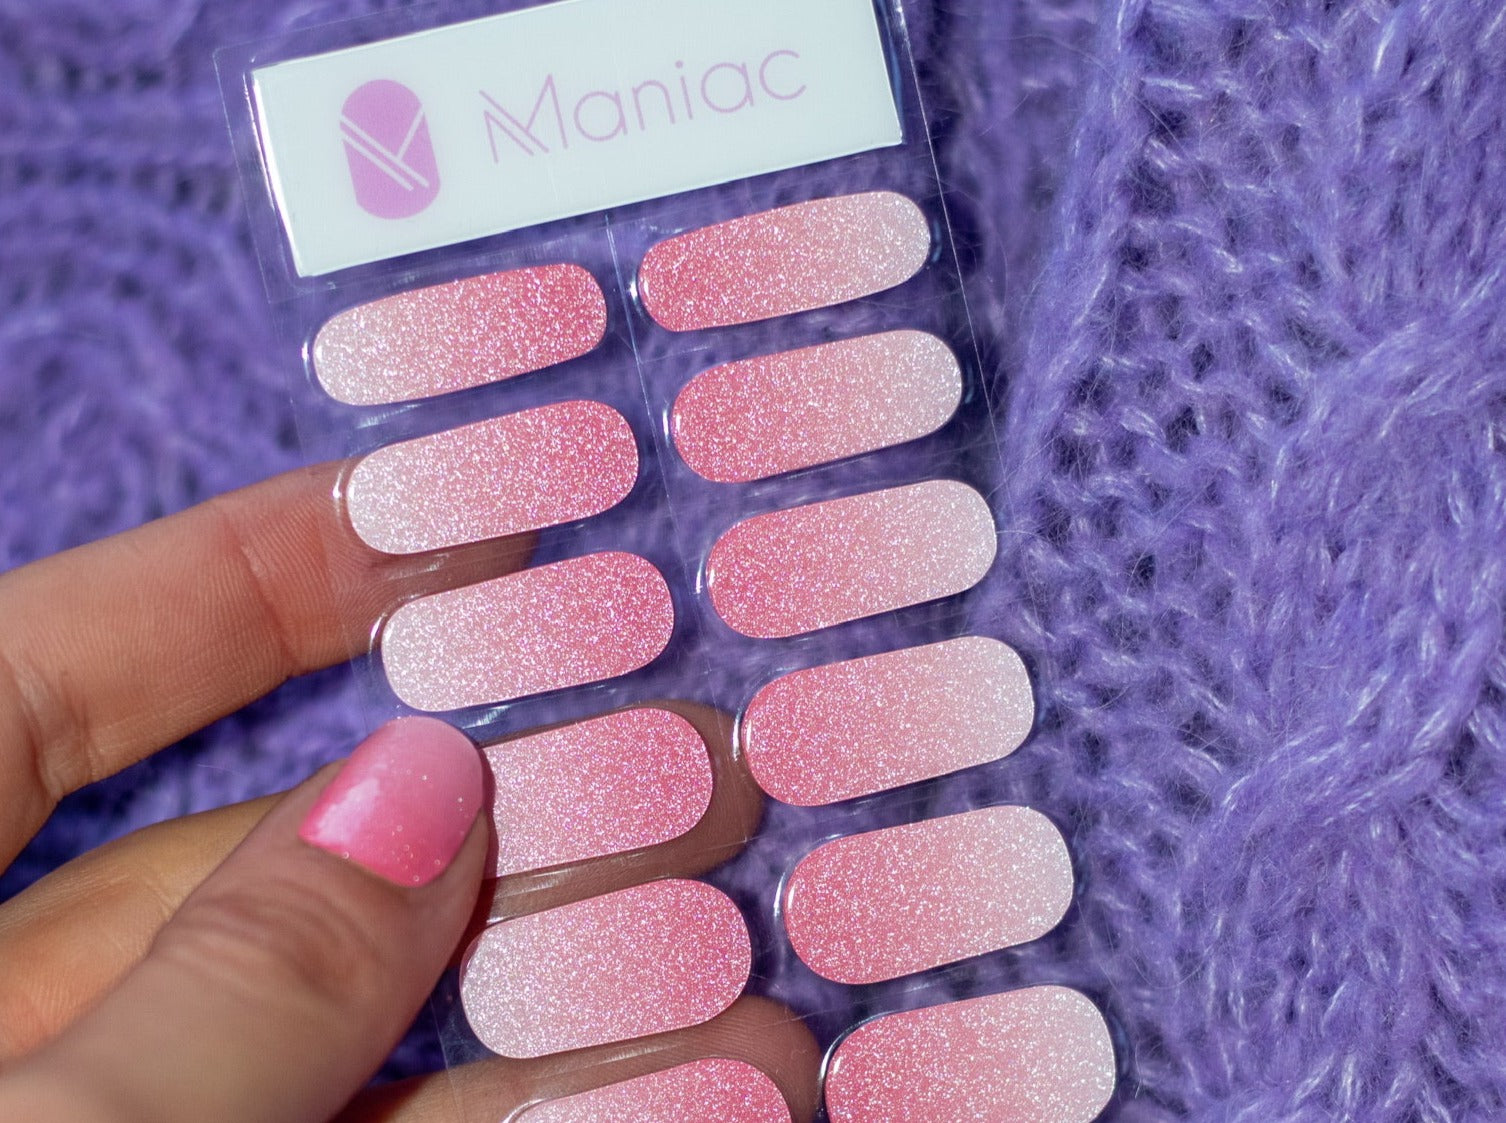 Cotton Candy Maniac Nails Gellak Stickers Ombre Pink and white Manicure Glitter Nail Sheet